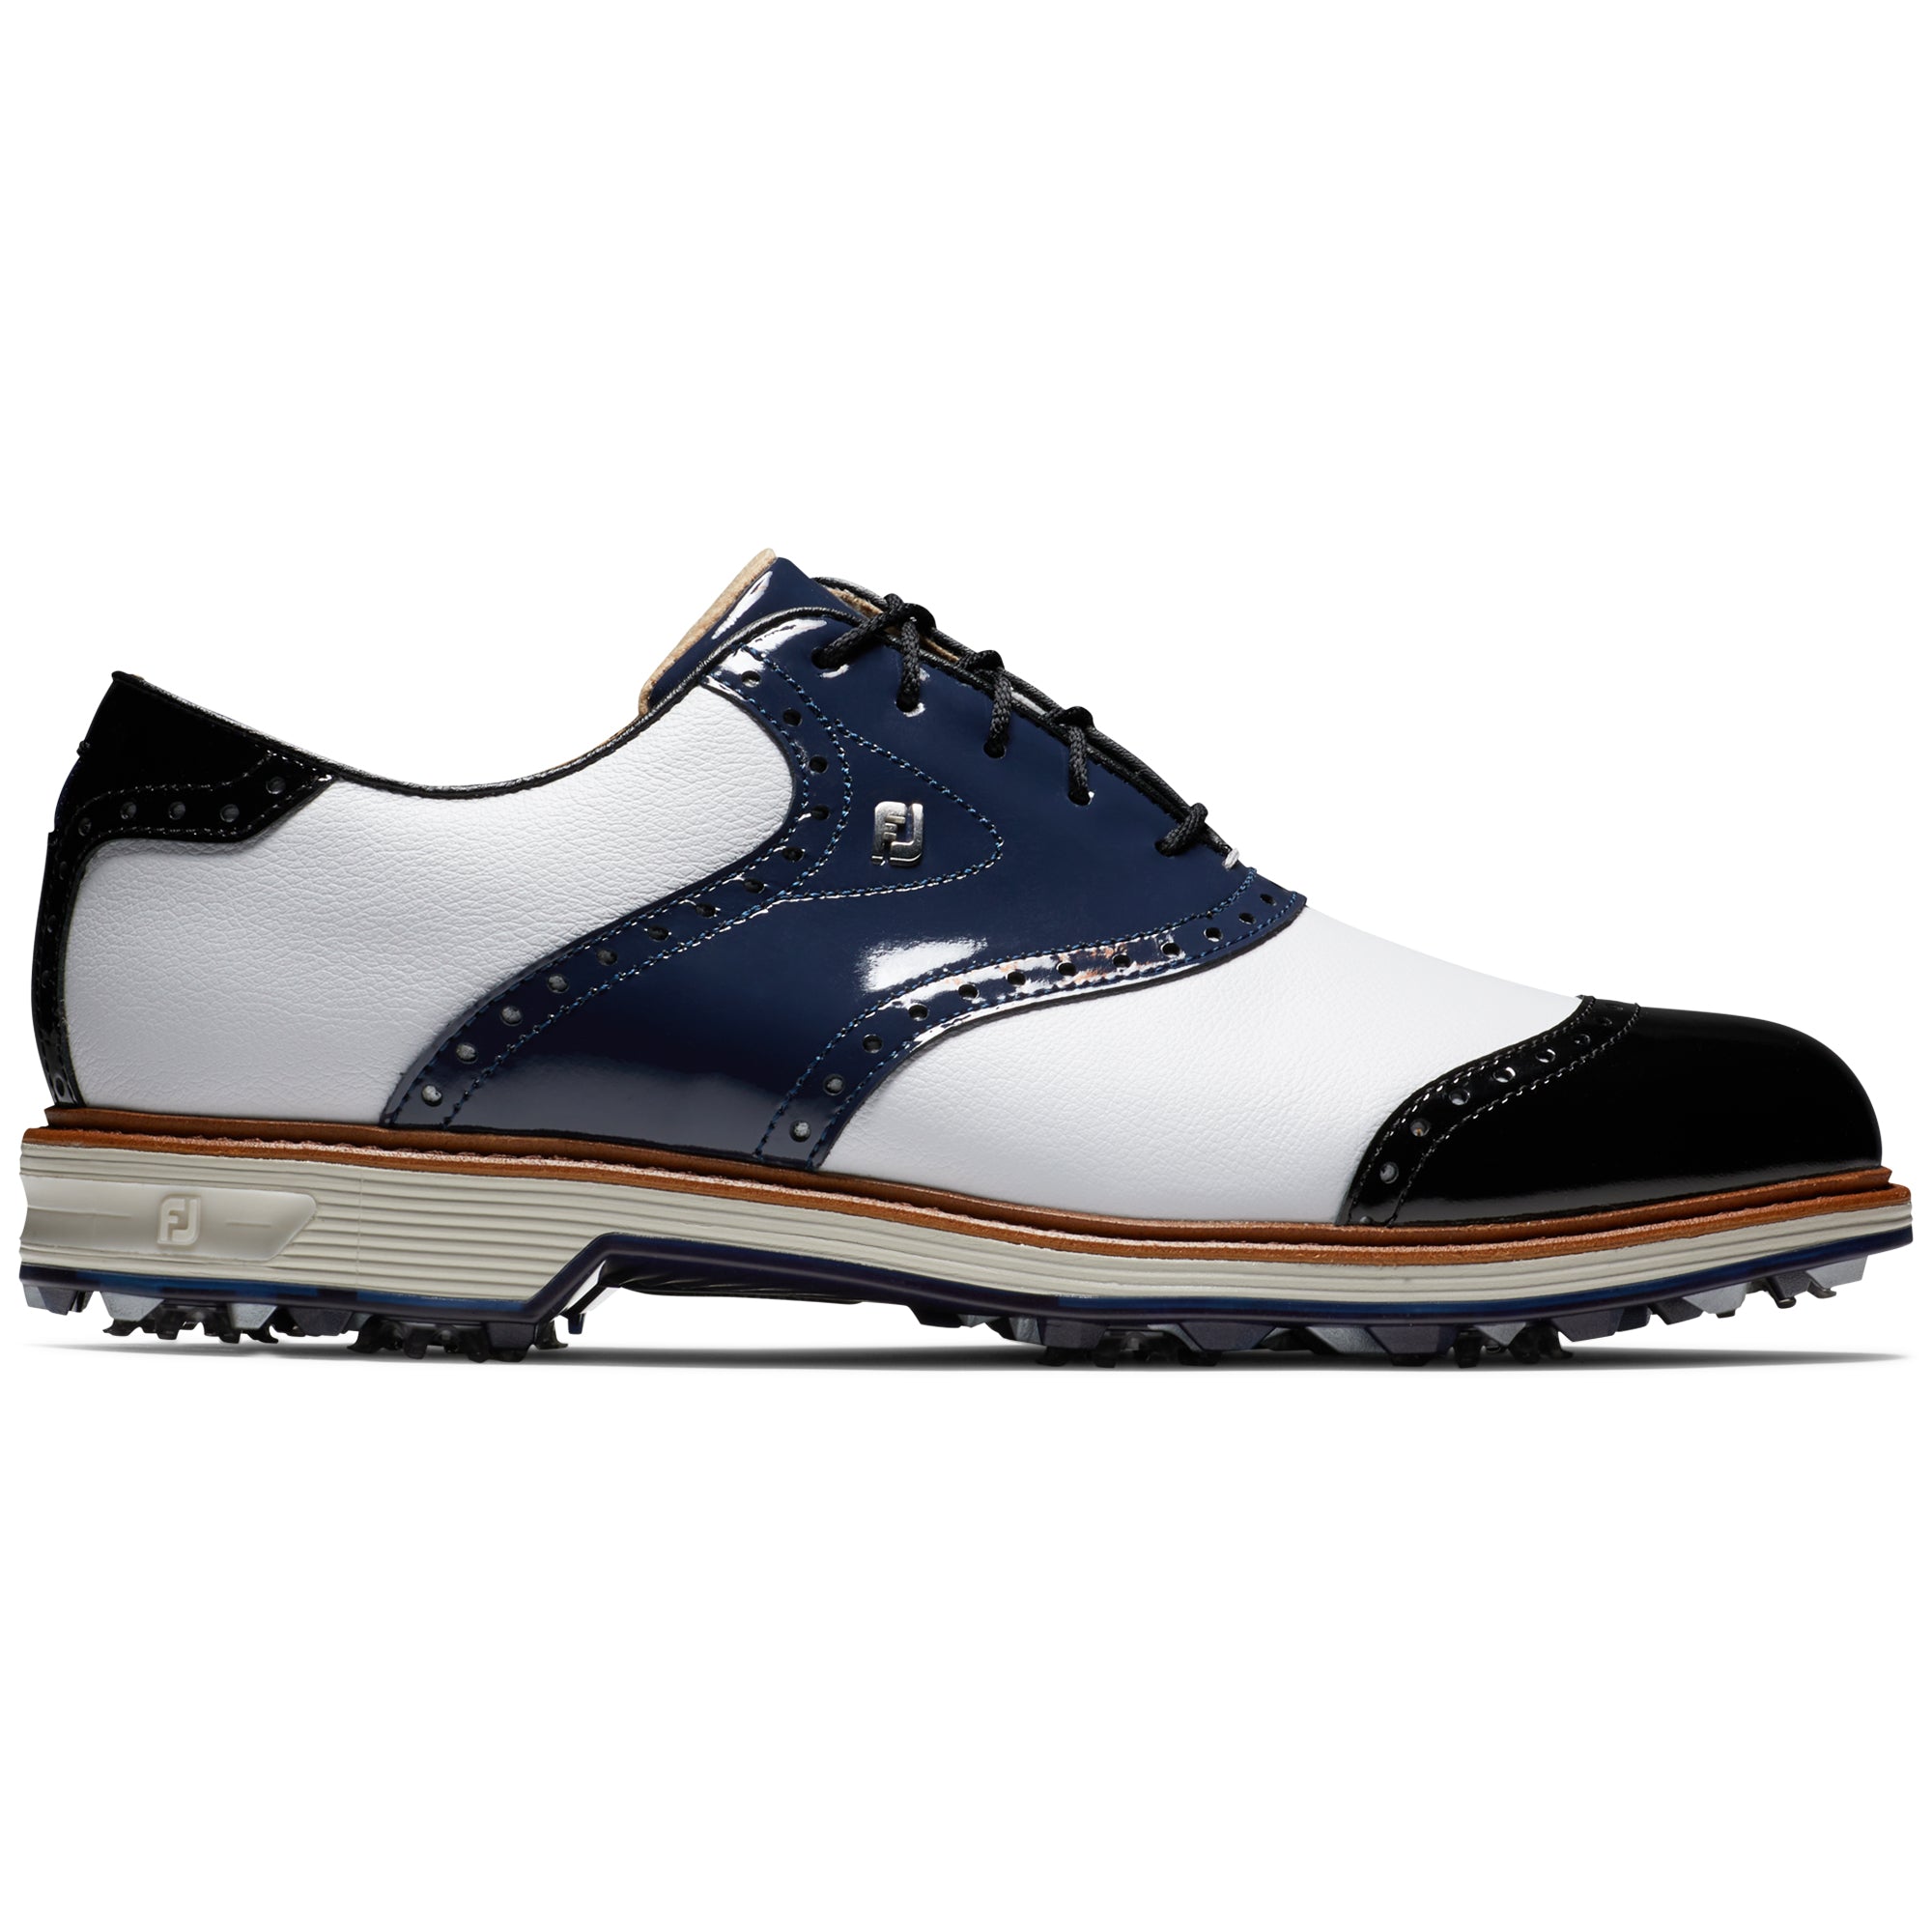 footjoy-premiere-series-wilcox-golf-shoes-54323-white-navy